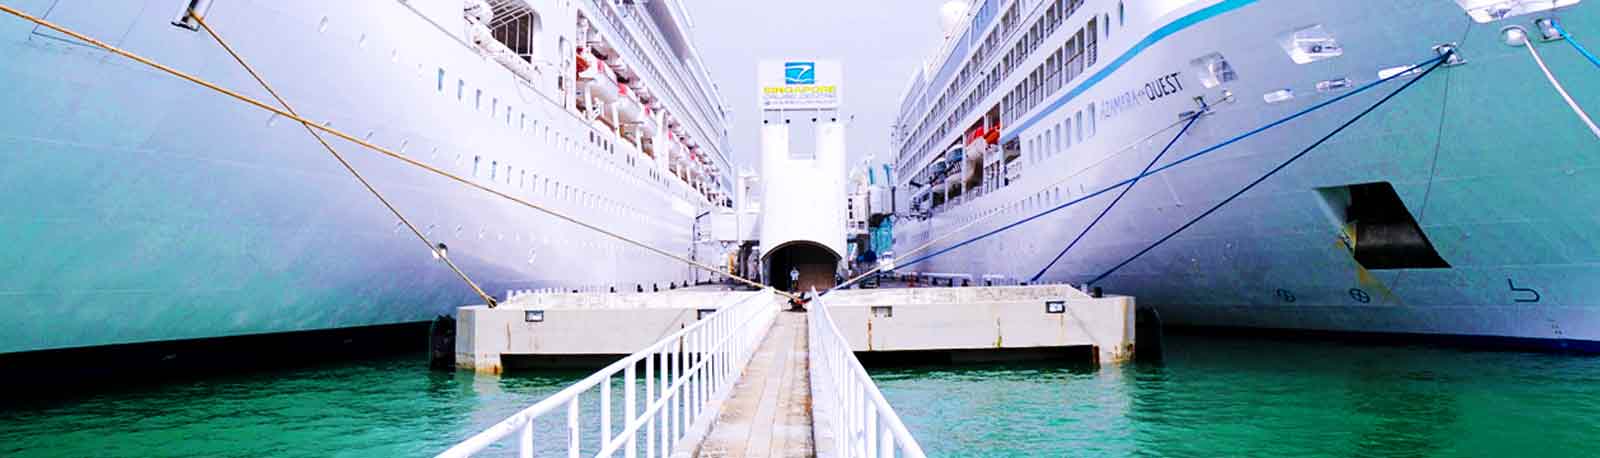 Photo of the International Pier Terminal in Singapore Cruise Port